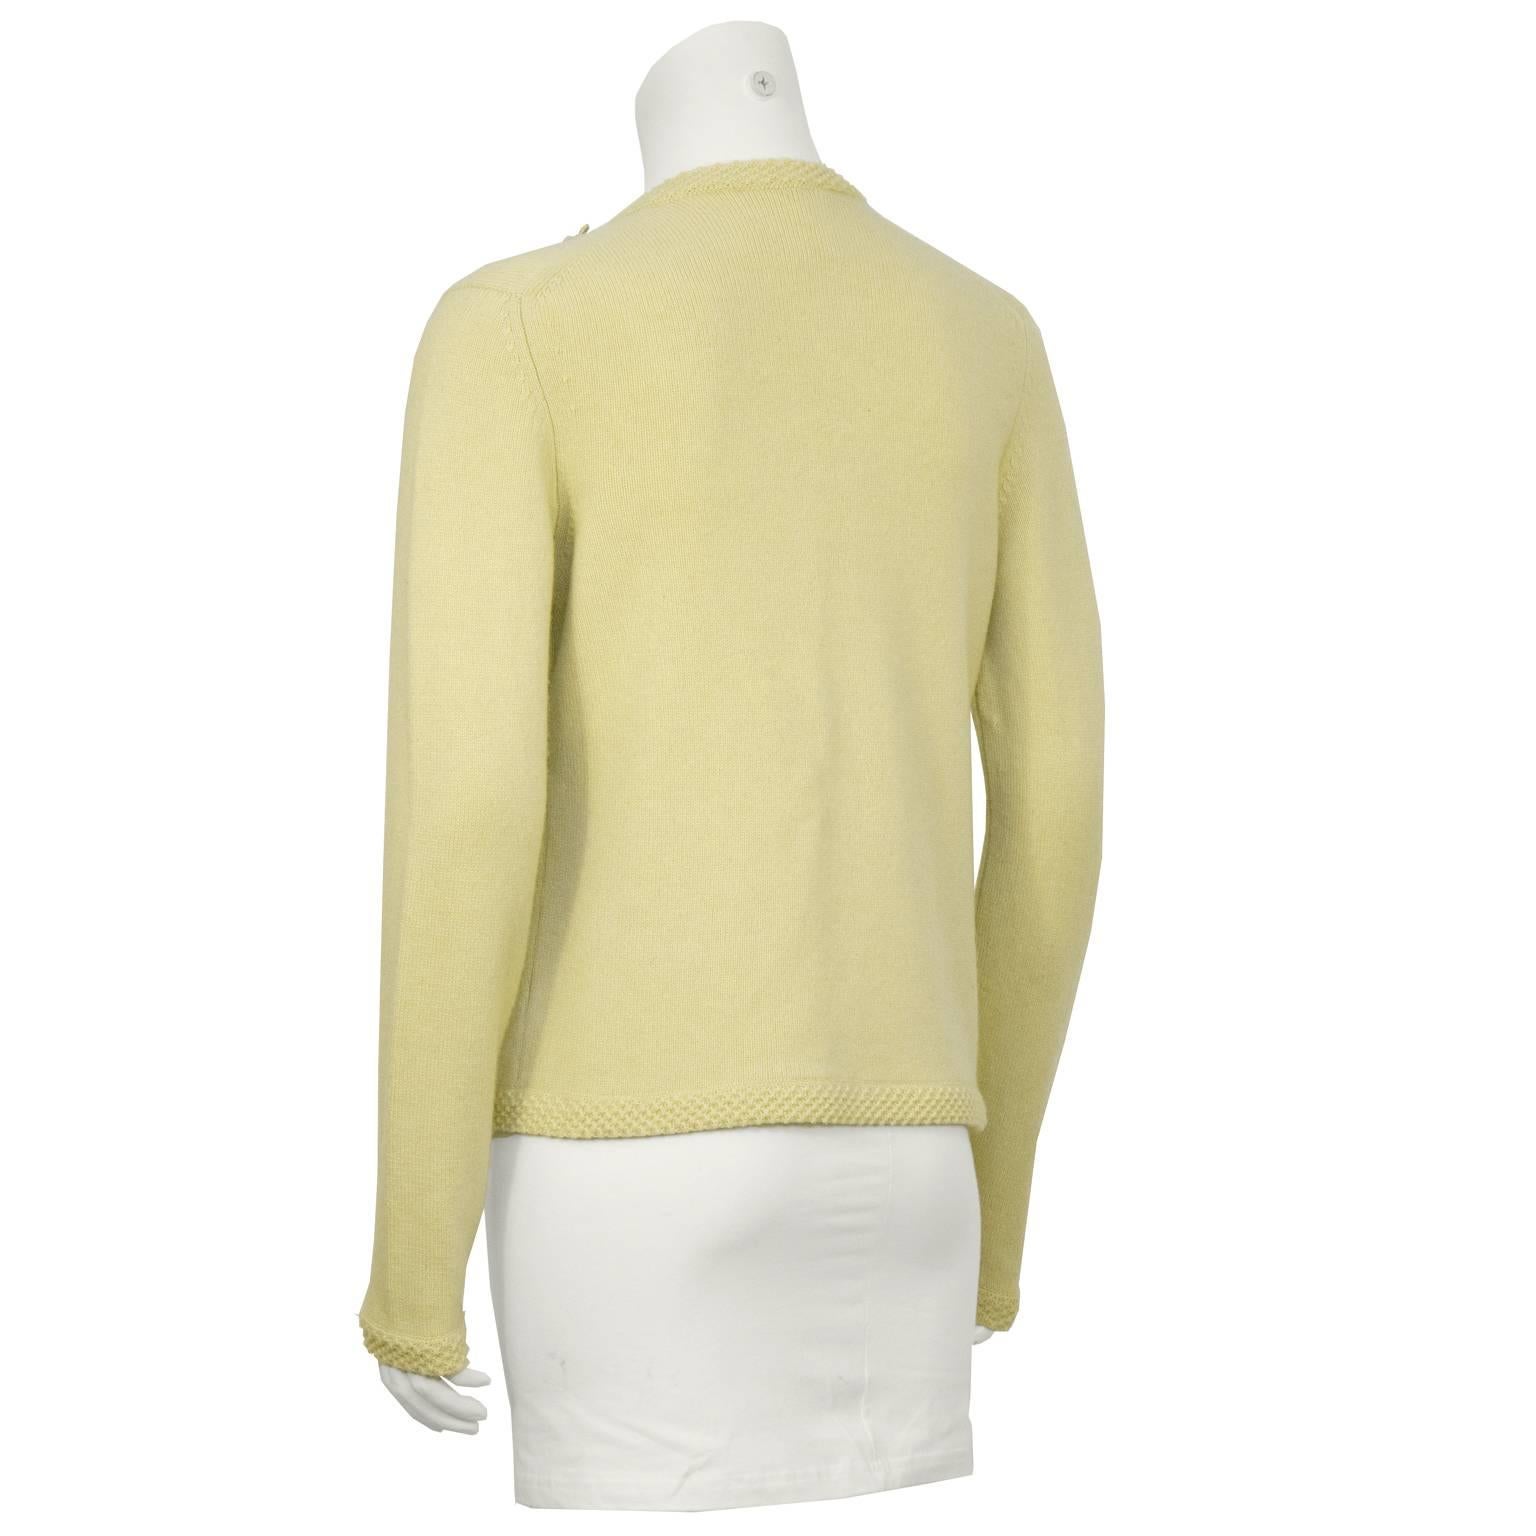 Beige Spring 2005 Chanel  Butter Yellow Cashmere Cardigan